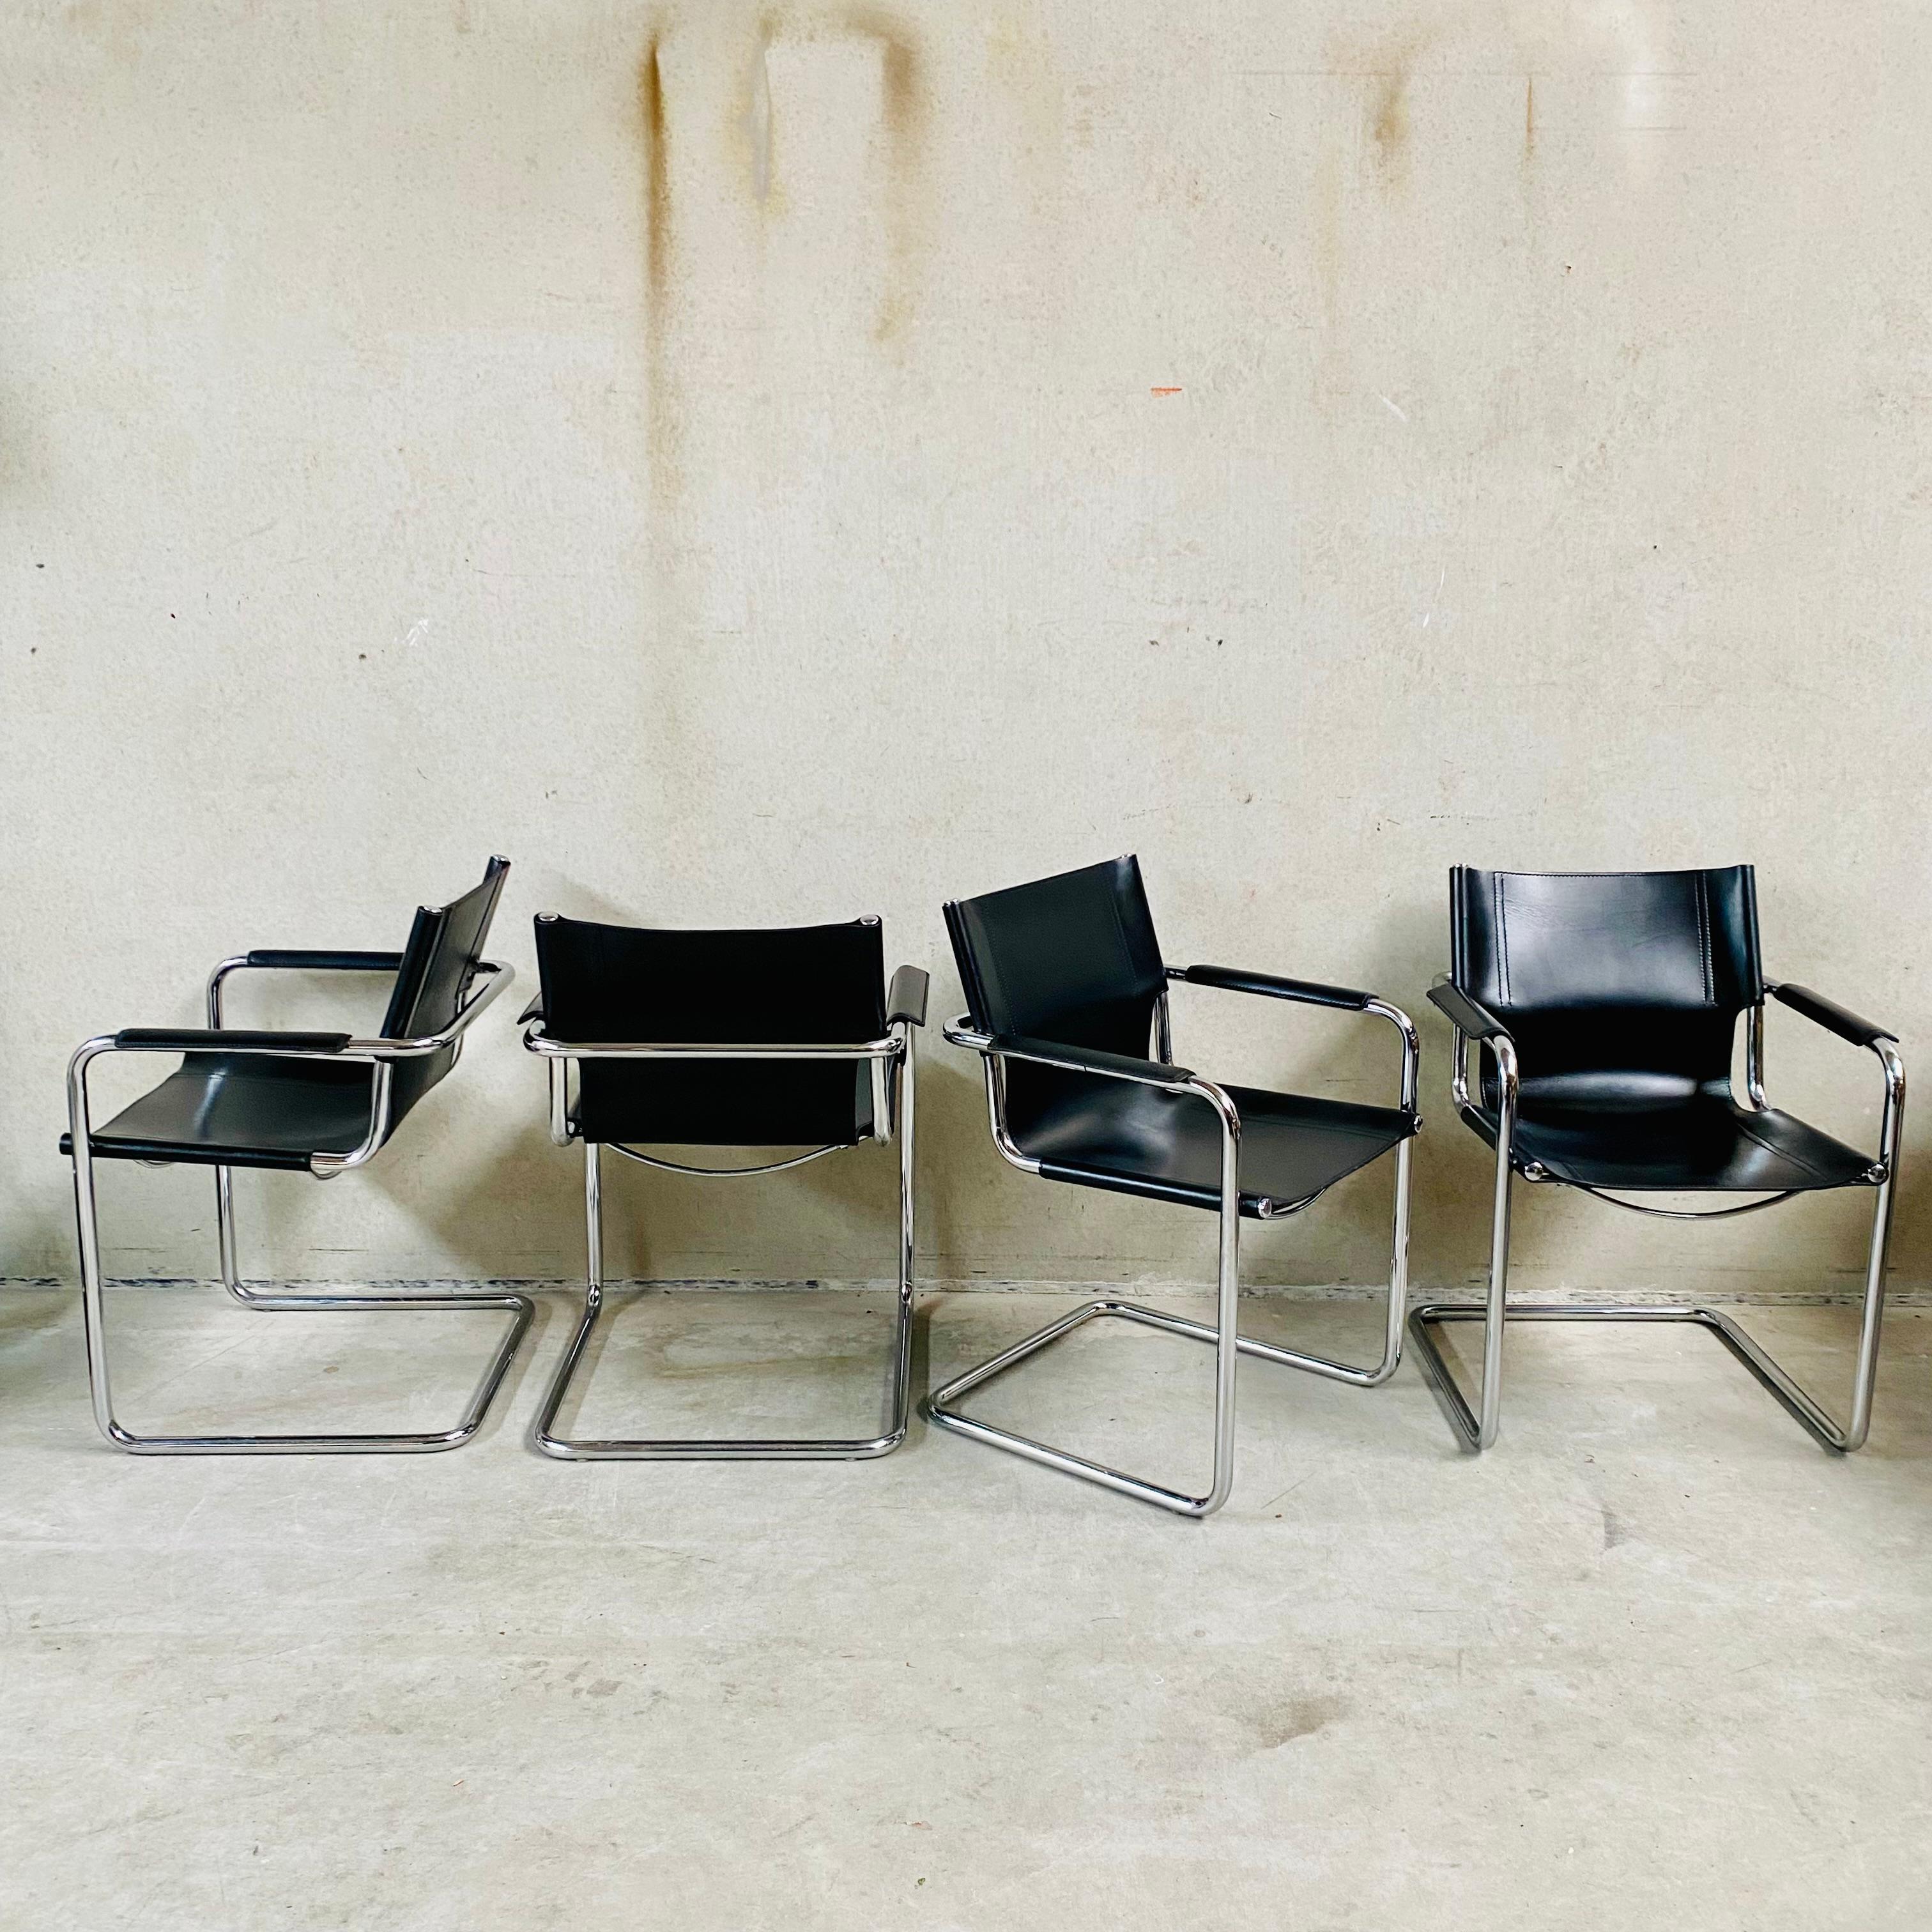 50 x Matteo Grassi Leather Cantilever Dining Chairs by Mart Stam, Italy 1970 For Sale 4